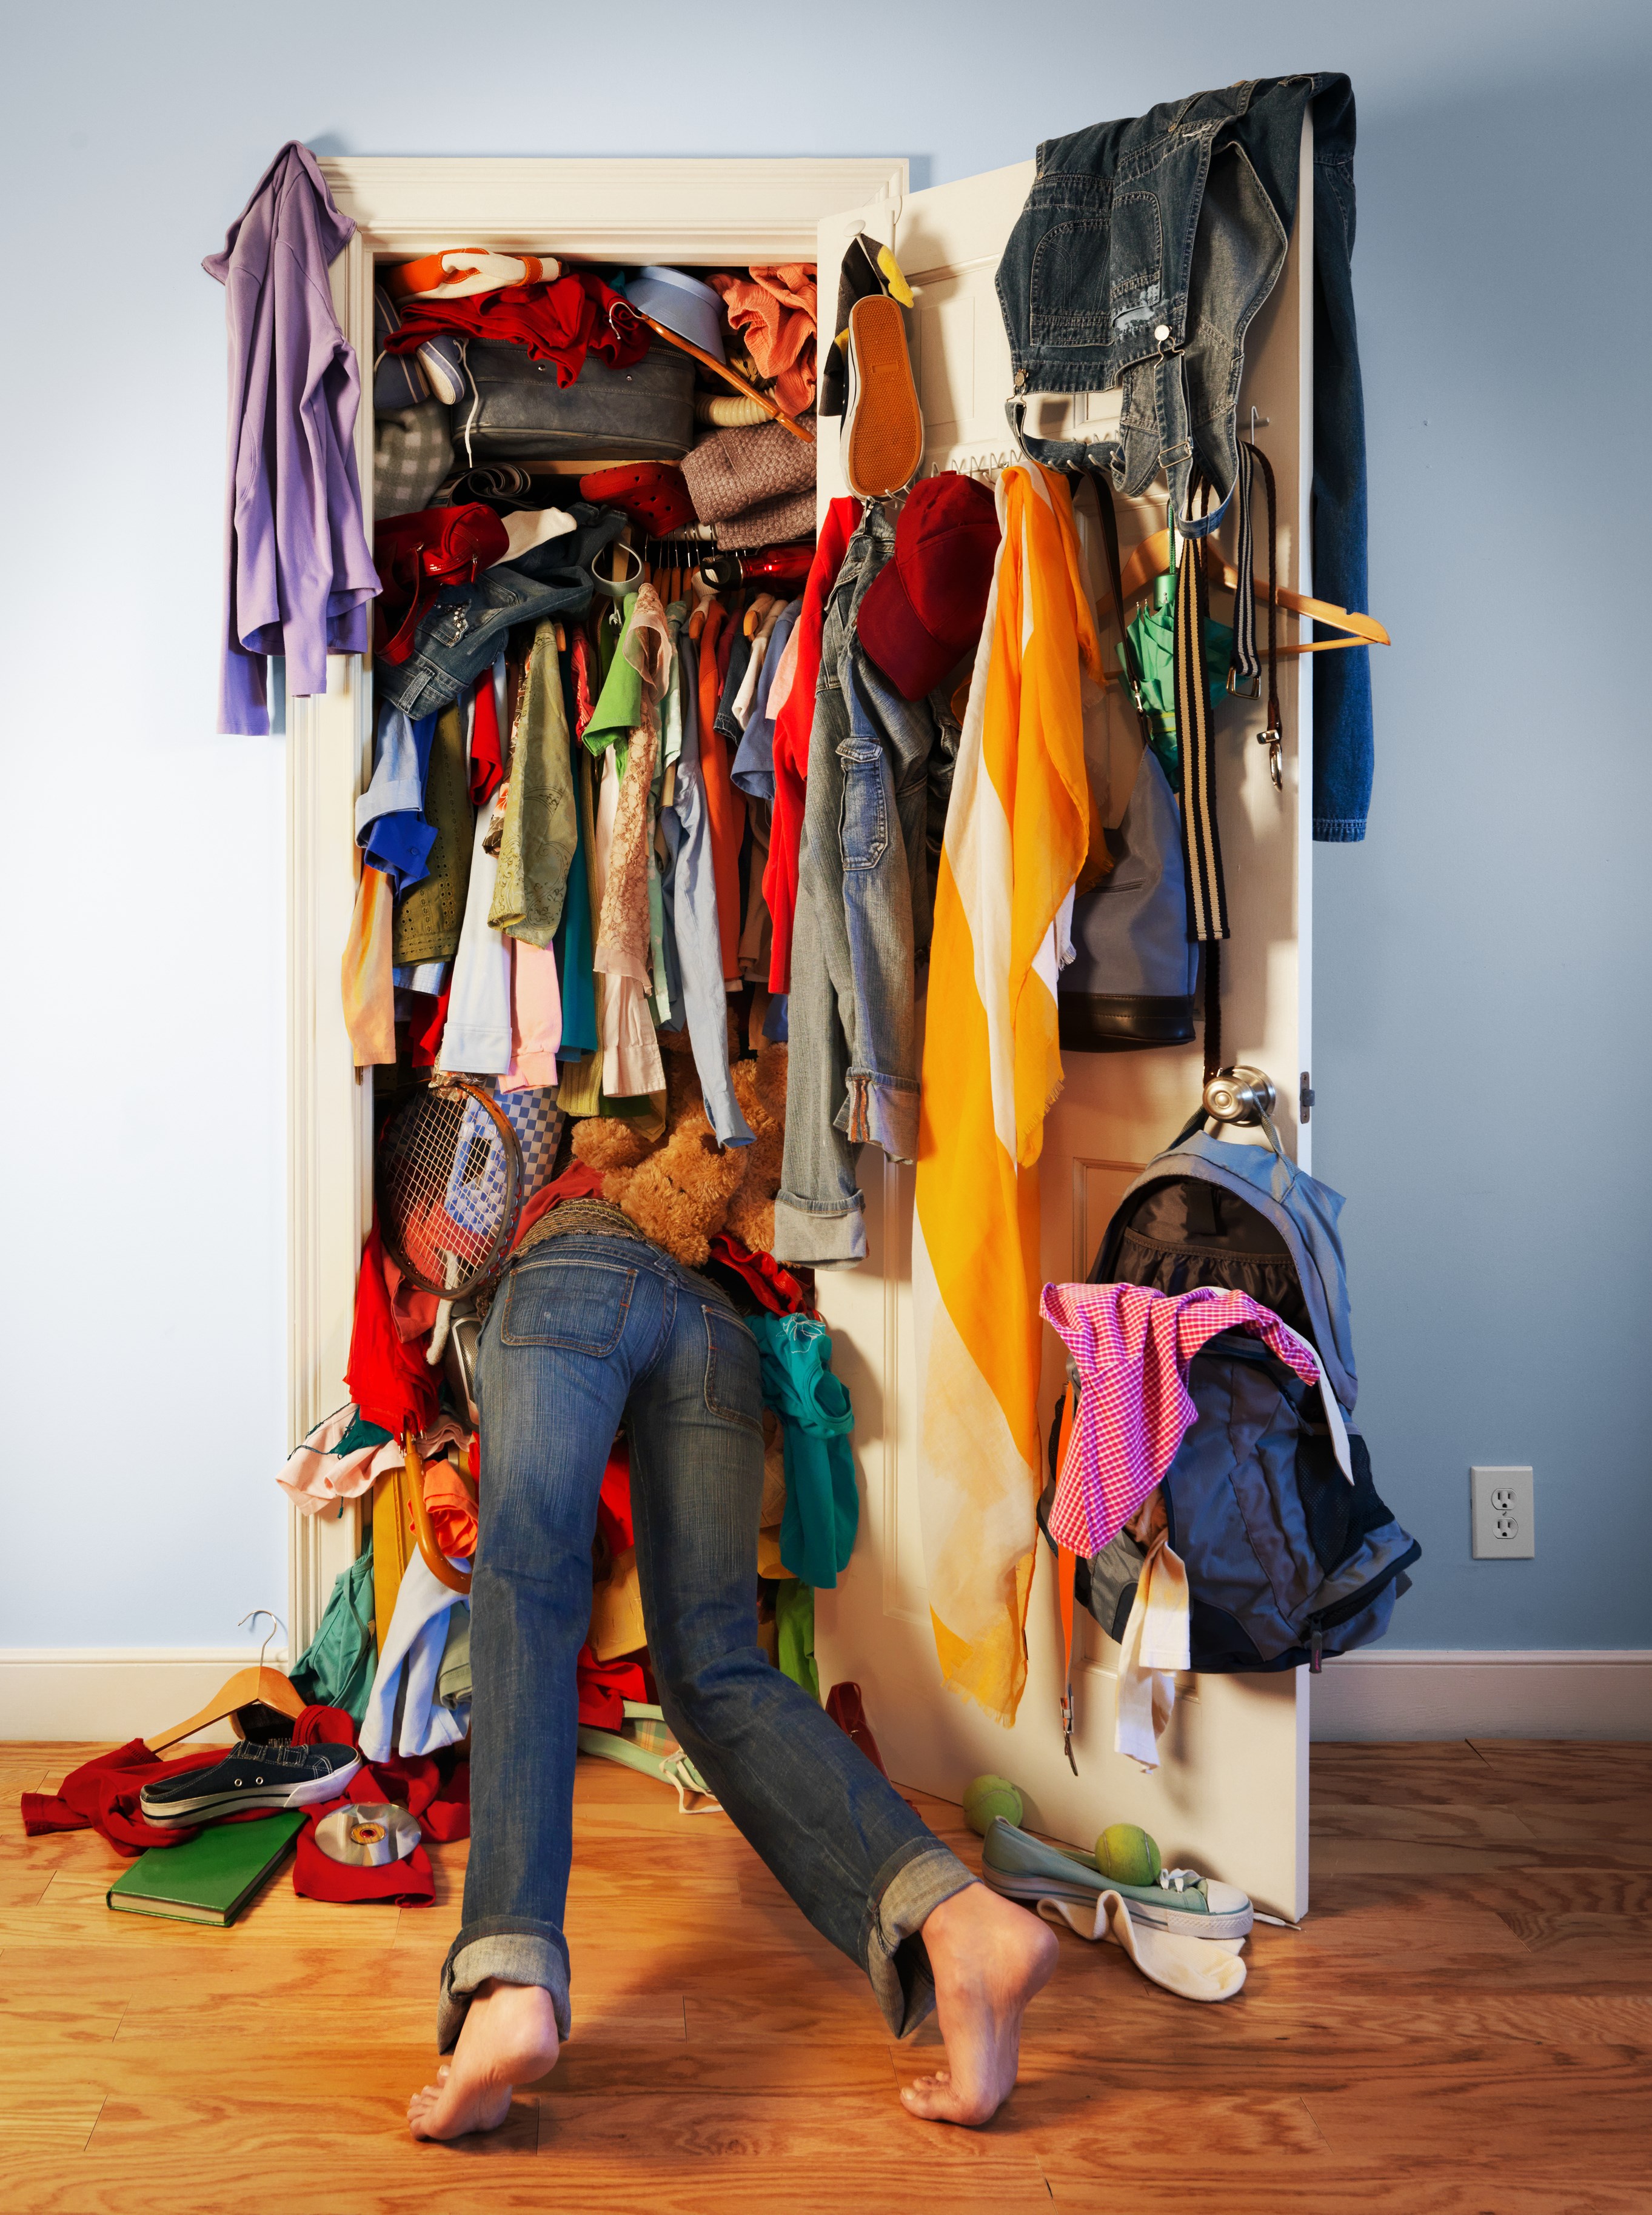 https://www.bissellrental.com/userfiles/image/CleaningTips/CLEAR_OUT_YOUR_CLOSET_CLUTTER_jpg.jpg